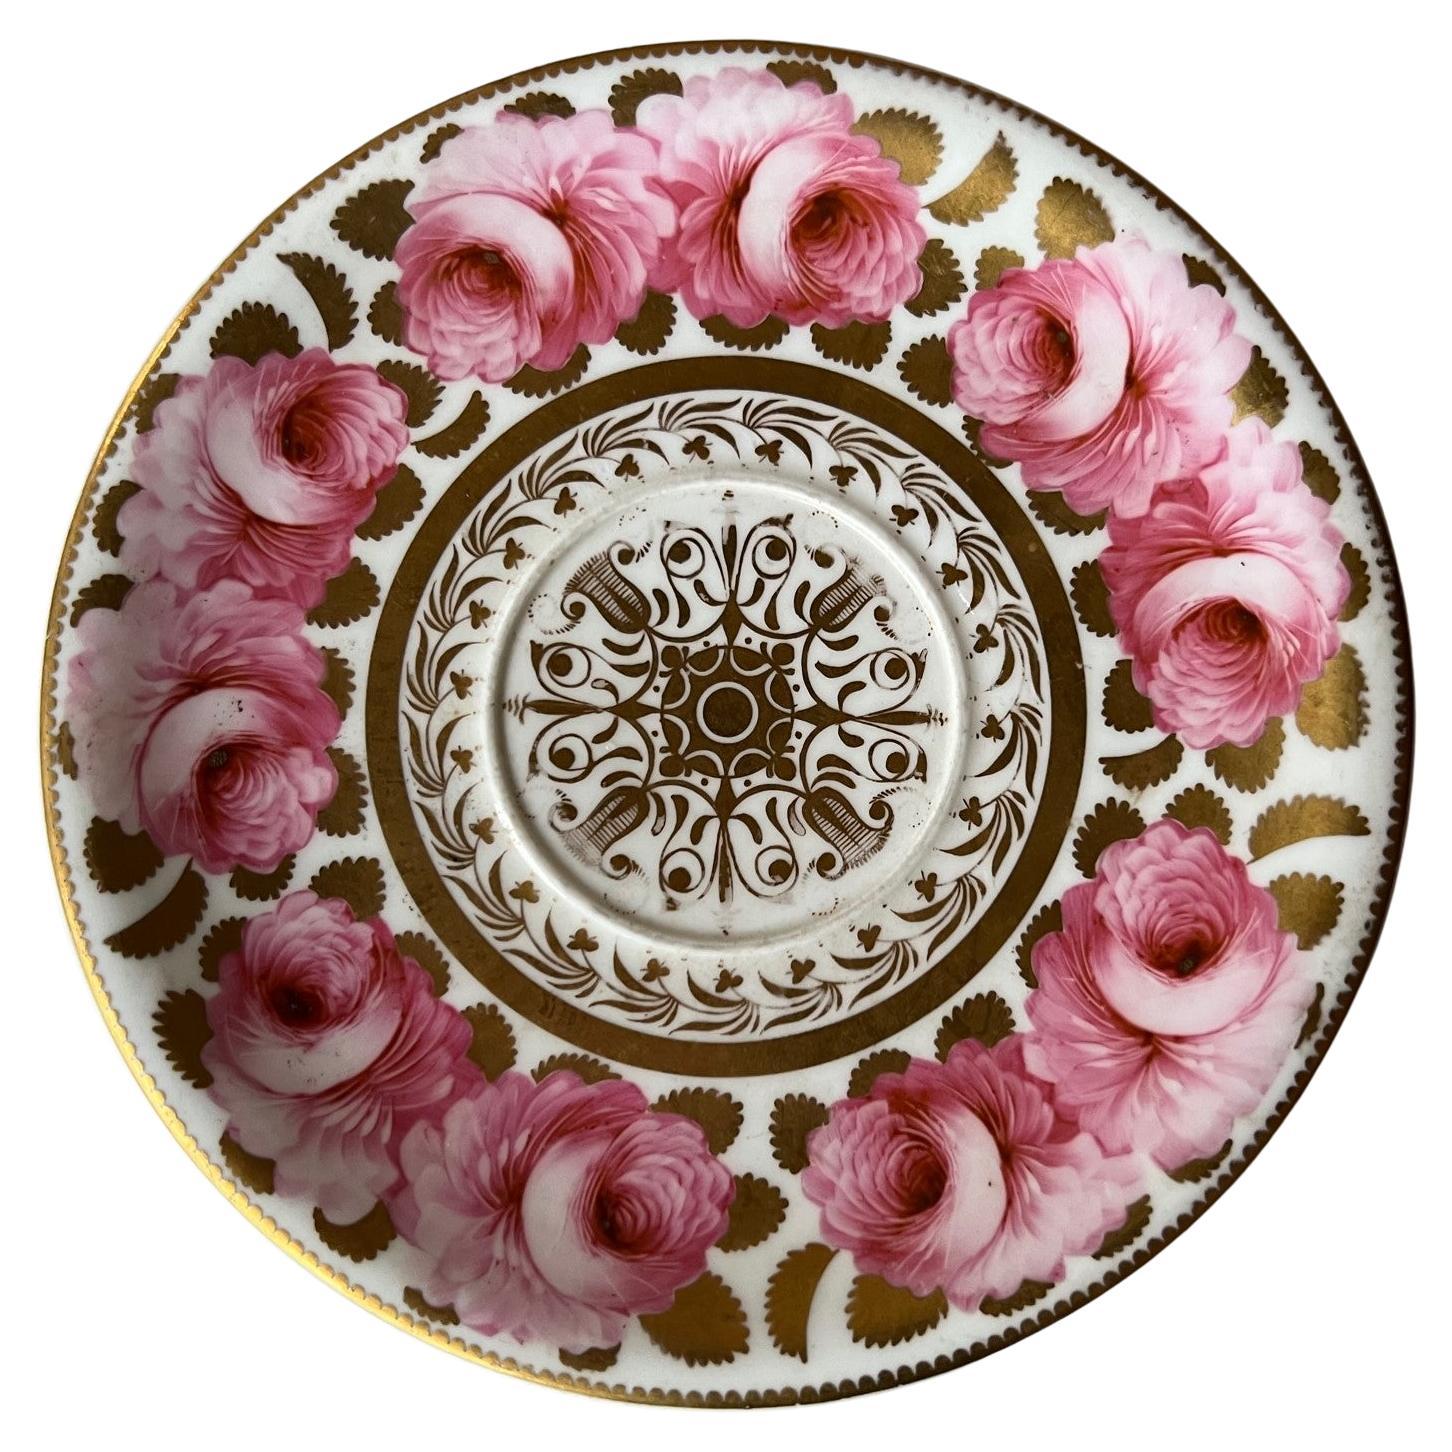 Early Spode Hand Painted Porcelain Plate / Saucer, circa 1820 For Sale